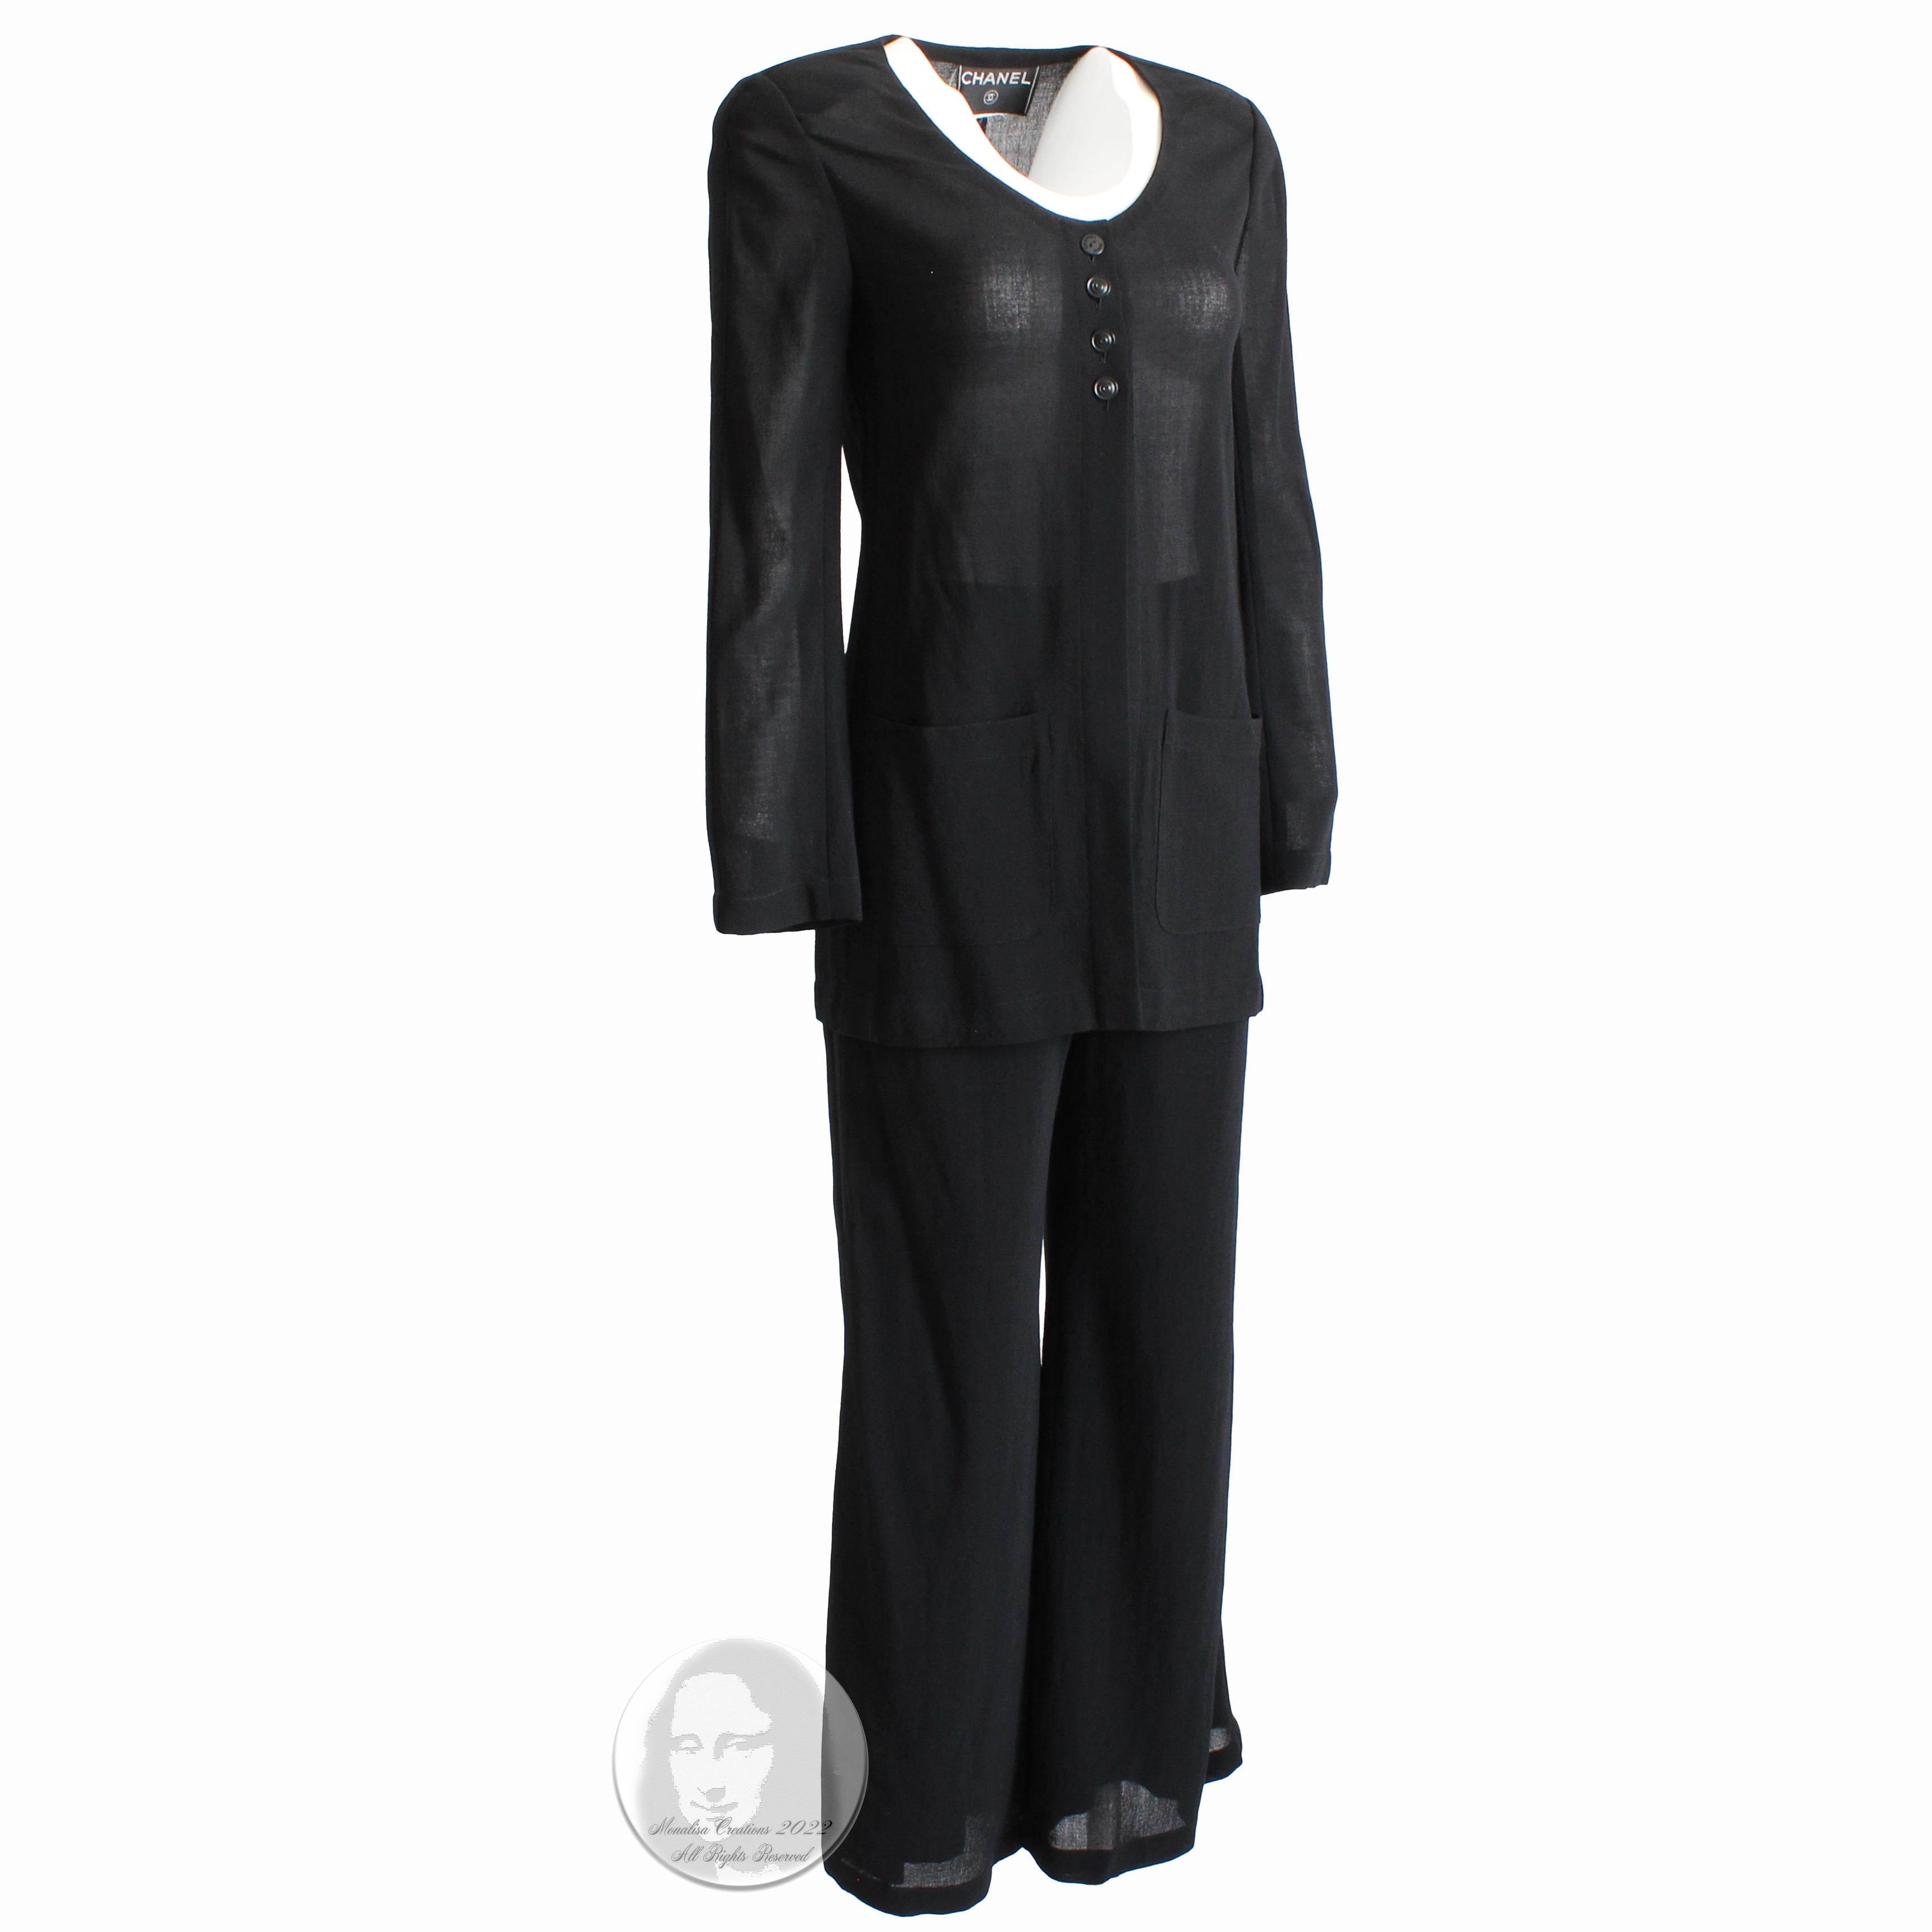 Authentic, preowned, vintage Chanel Black Sheer Wool Crepe Jacket and Pant Suit 2pc Size 36, circa 1999. Jacket is sheer and unlined w/chain at hem; pant is partially lined in silk. Super chic set that can be styled in so many ways - and lightweight